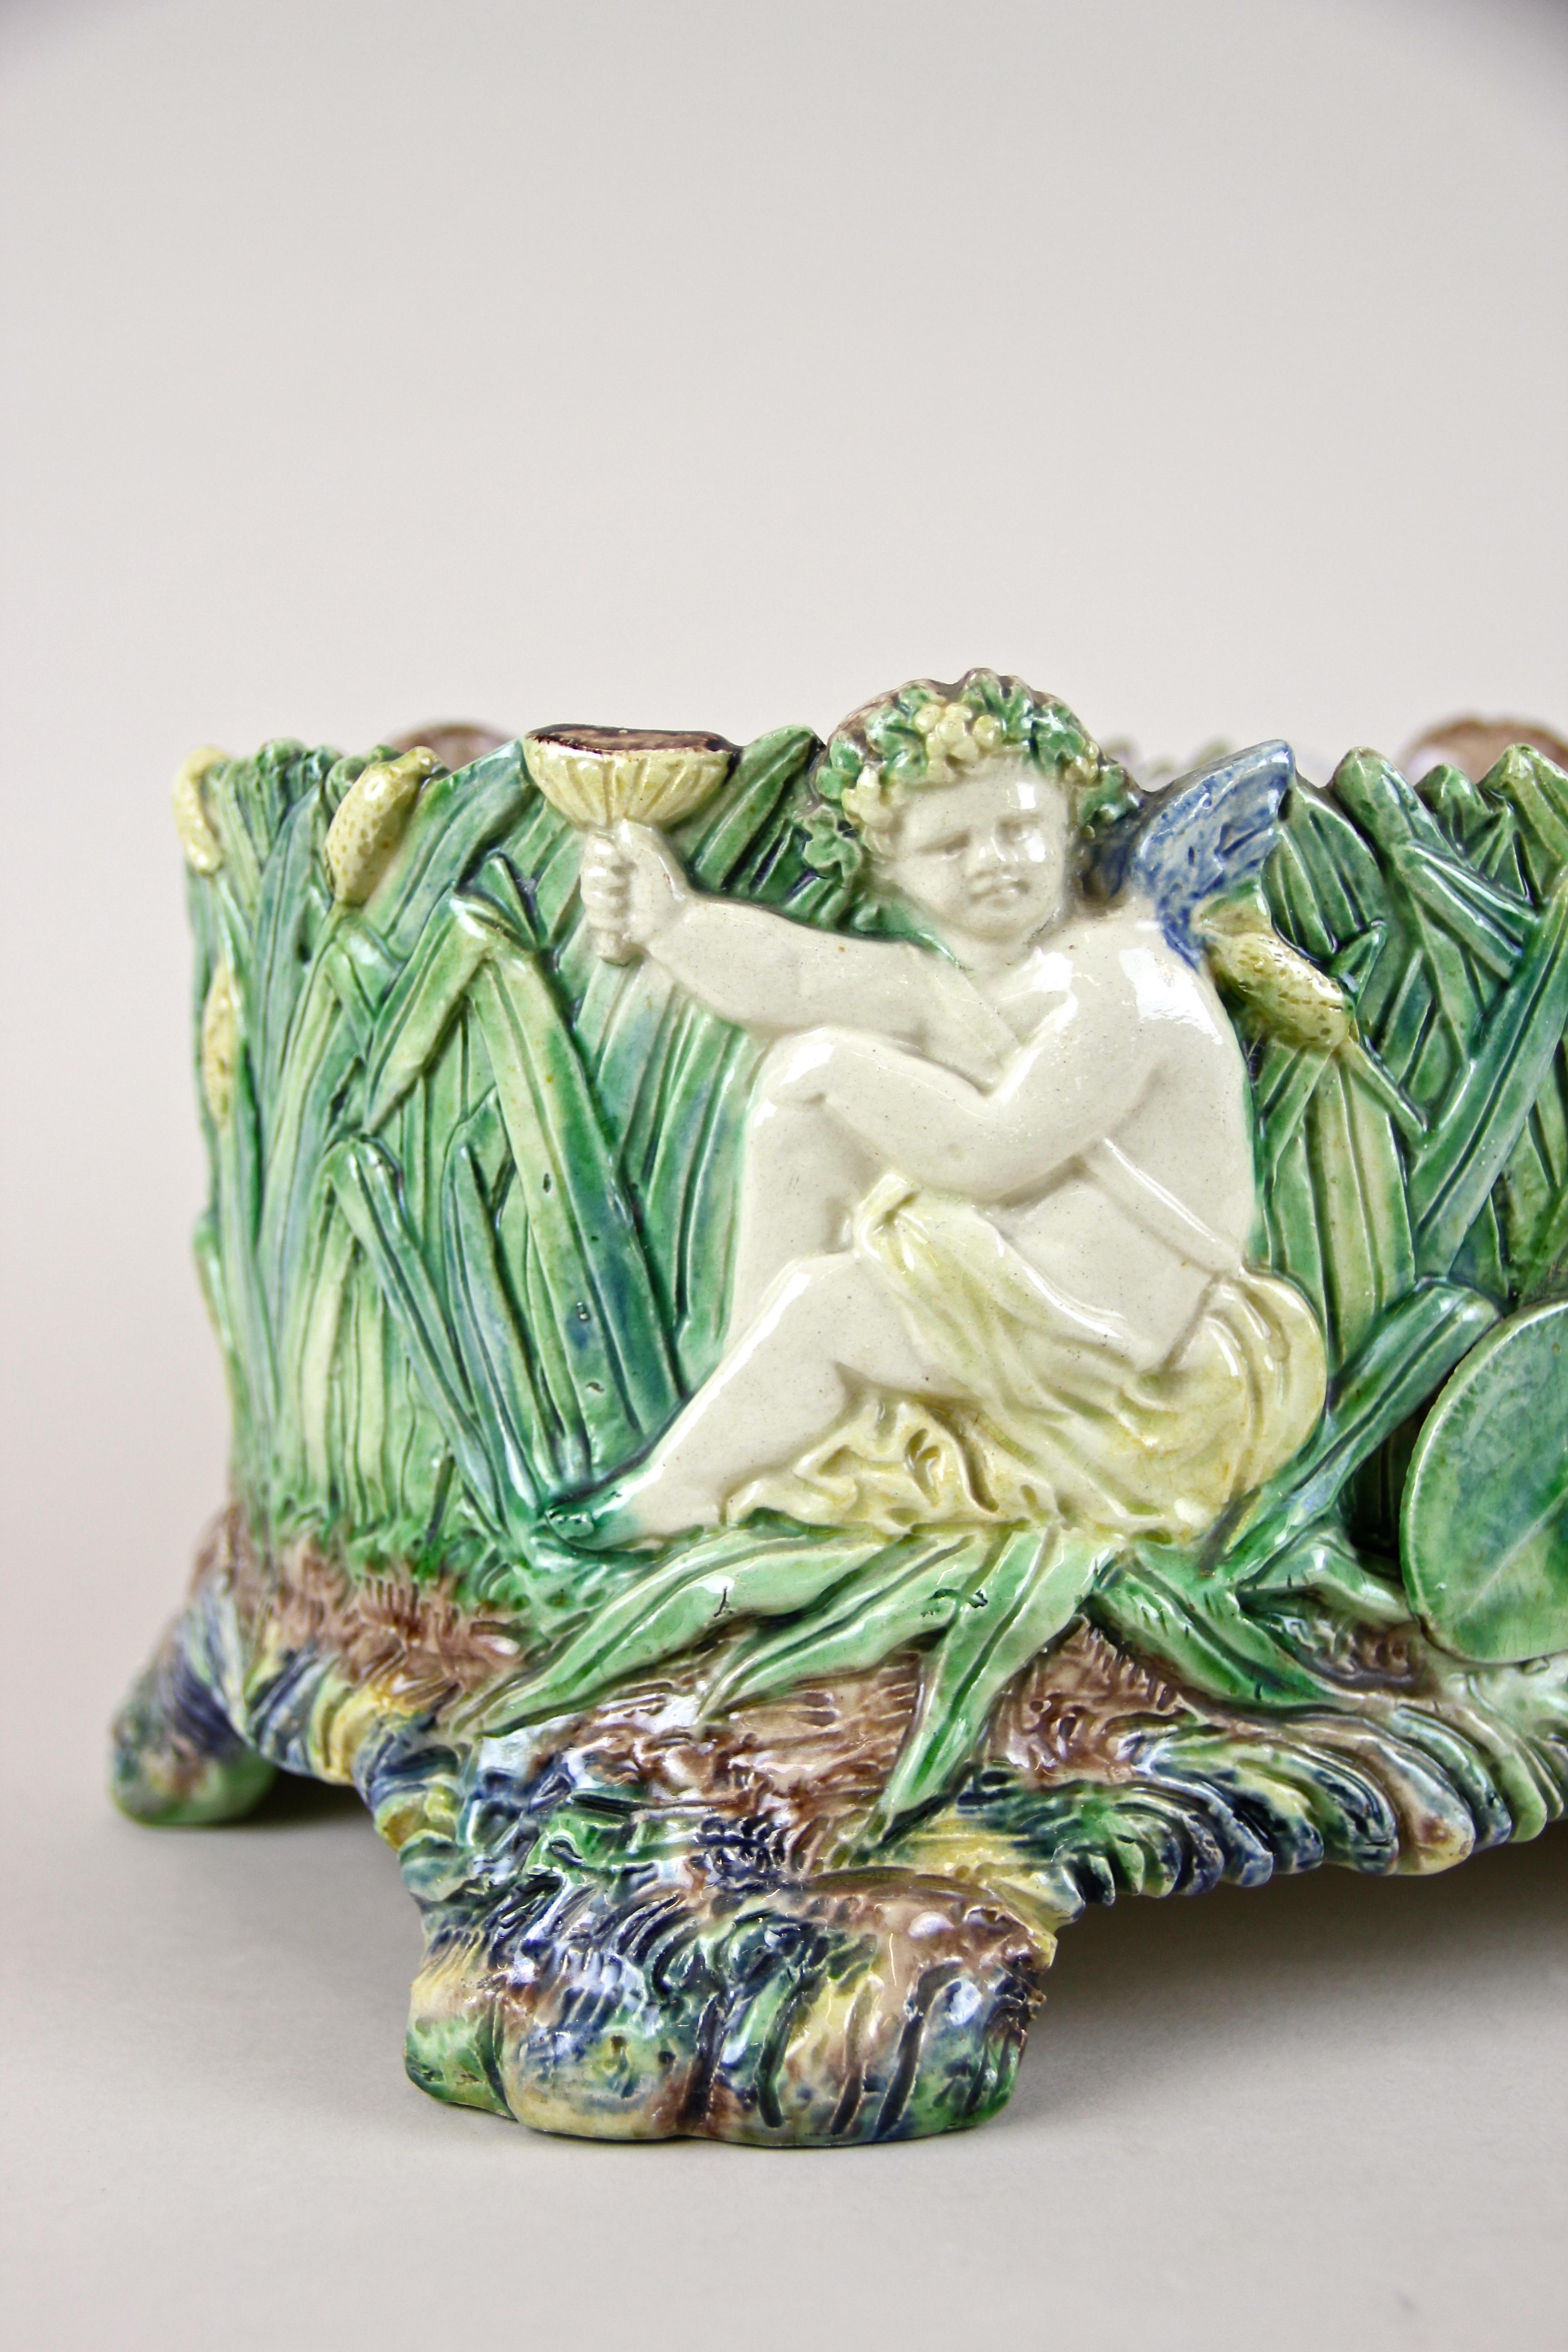 Breathtaking Italian Majolica jardinière from the early Art Nouveau period in Italy, circa 1900. This masterpiece of Majolica art comes in fantastic original untouched condition and convinces with an absolute unique look. Artfully processed in Italy